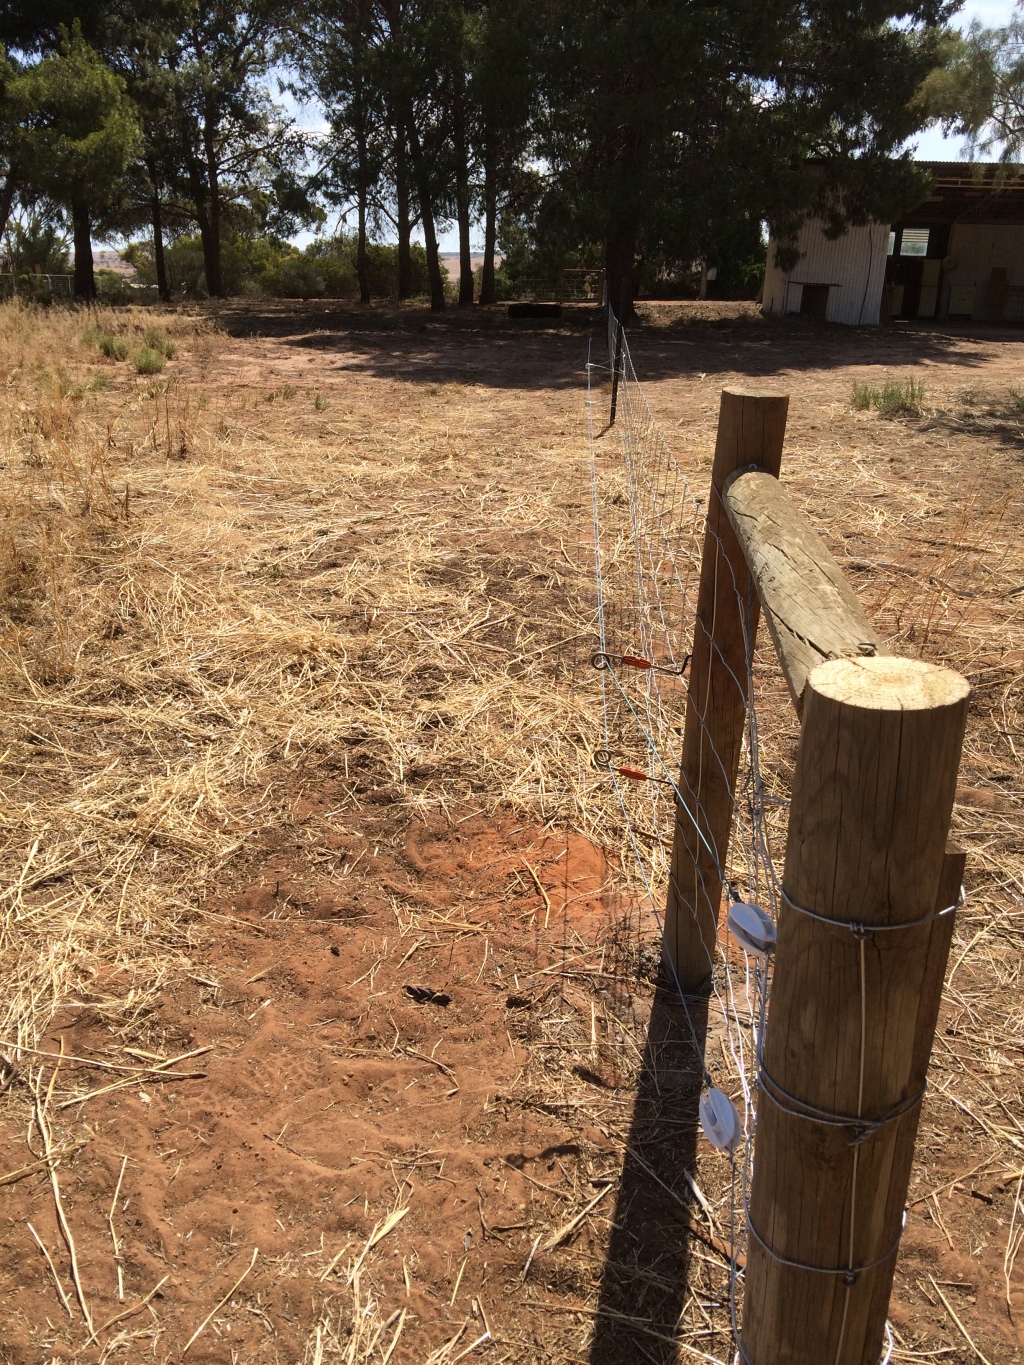 We've seen a lot of pig paddocks/yards/enclosures, and most of them are super dodgy. There's something about housing pigs that makes people think they should throw material together rather than build something permanent.  Not these paddocks though - they're pro!